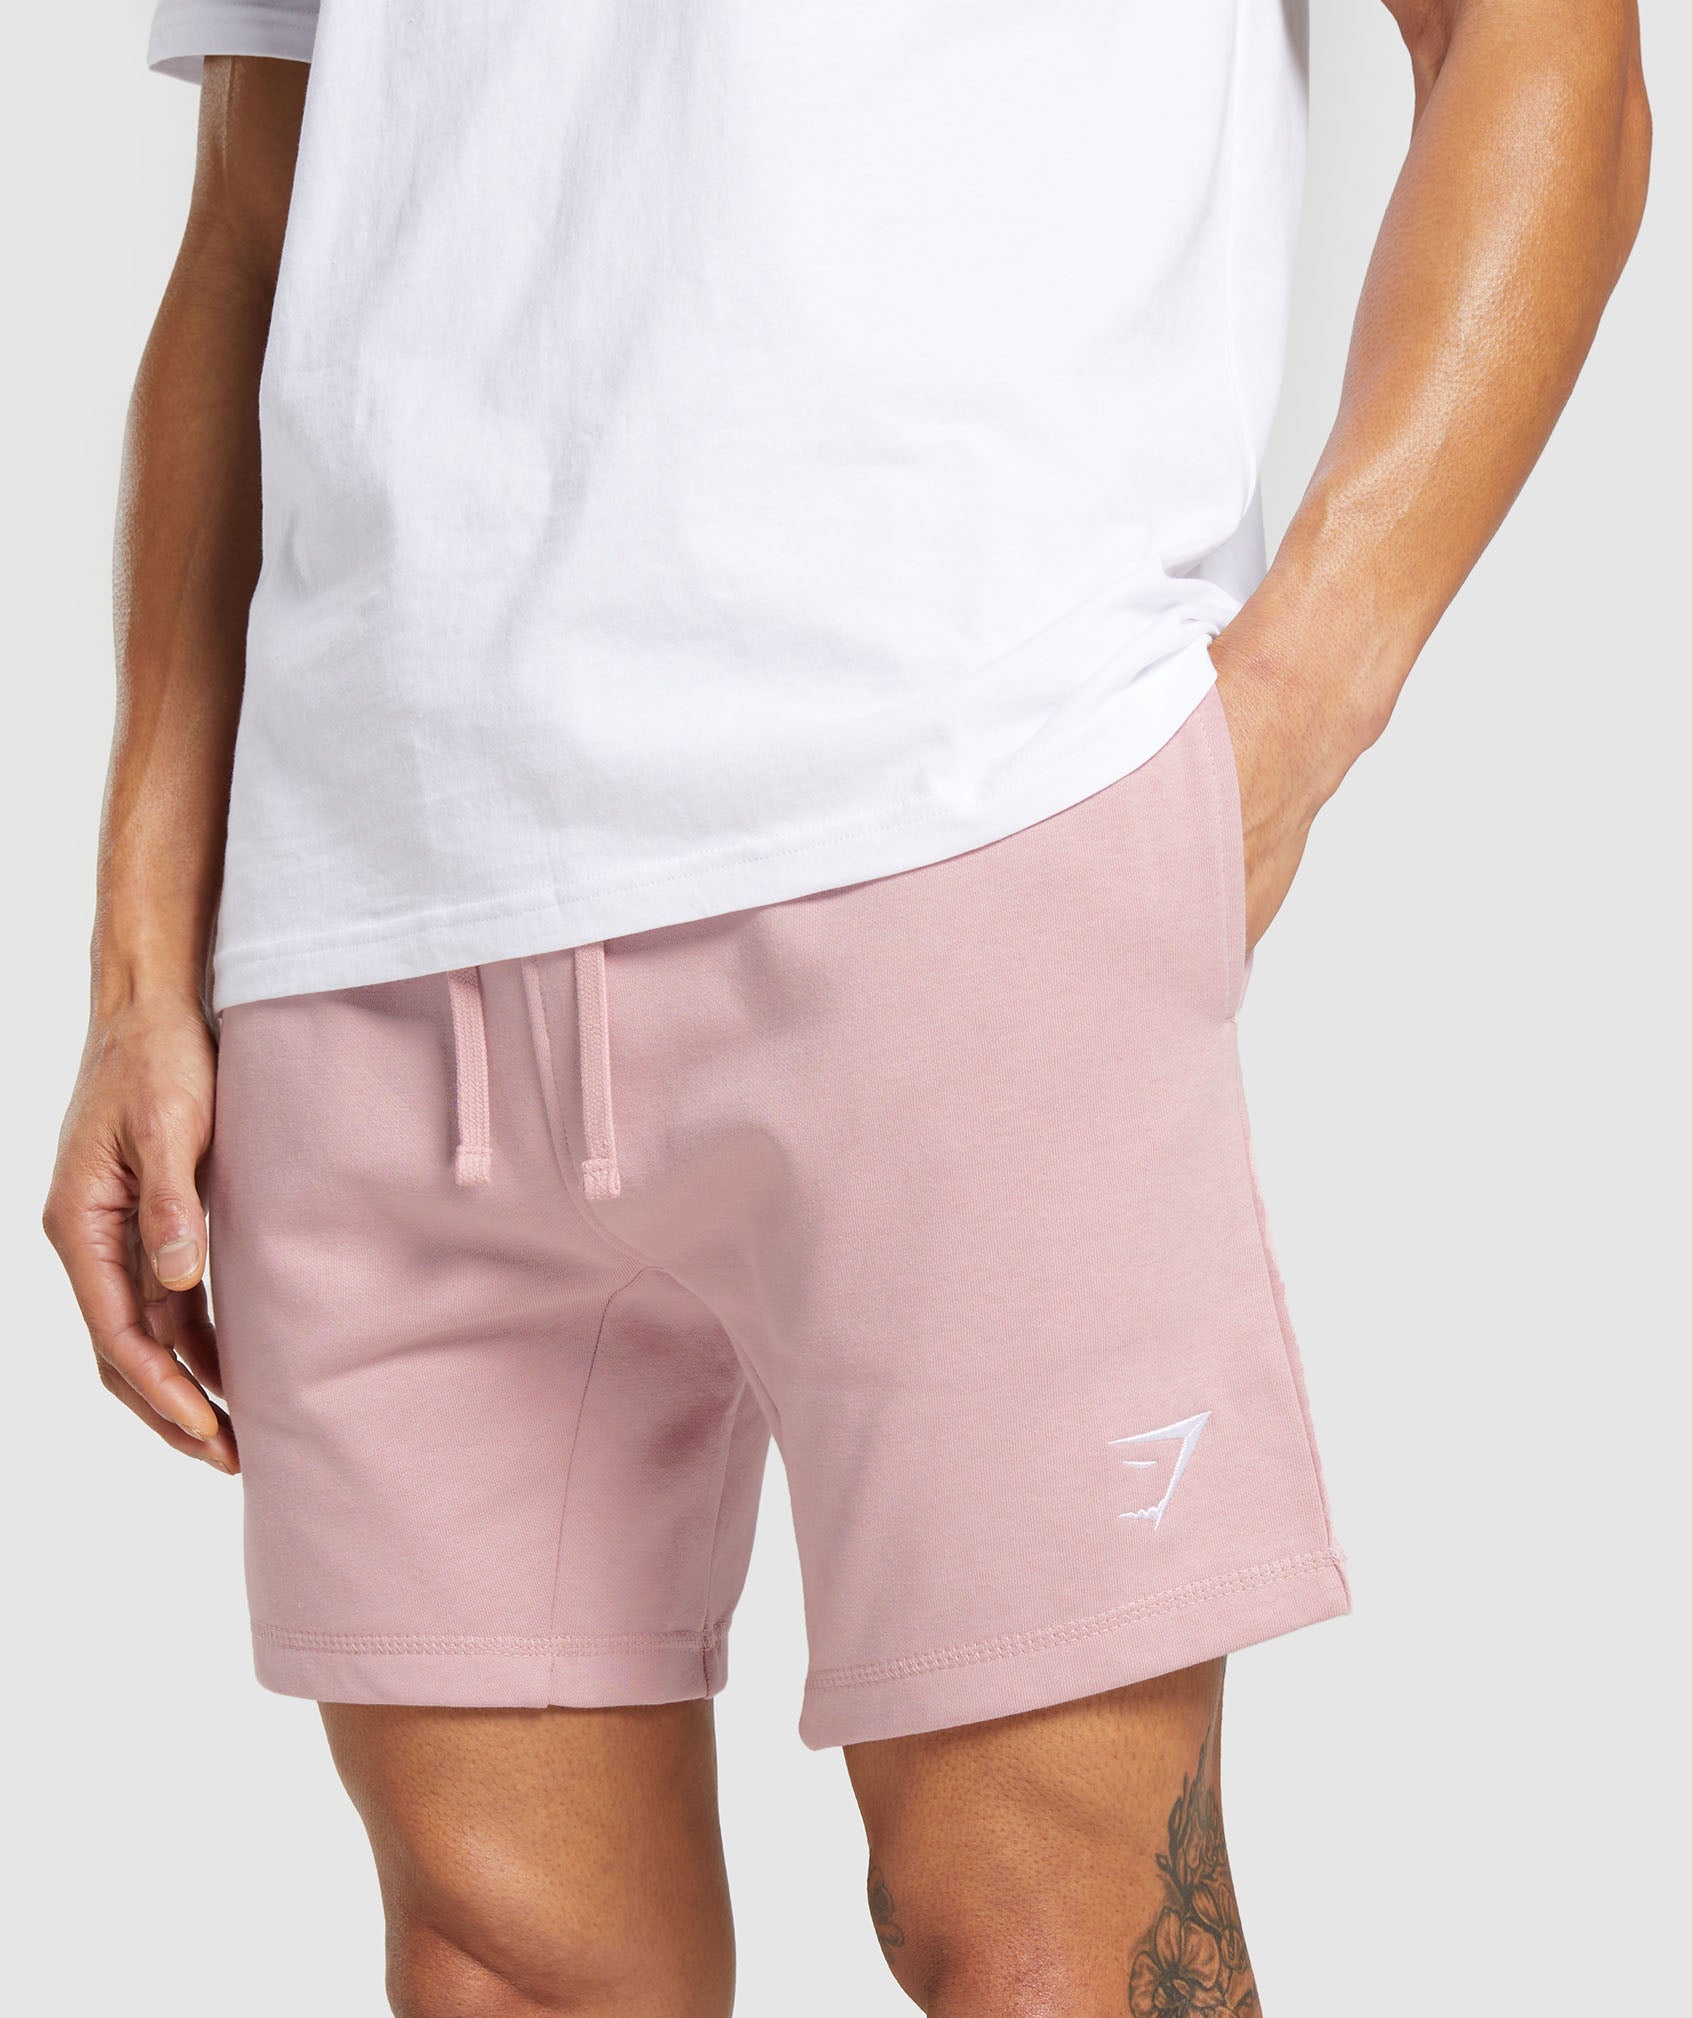 Crest 7" Shorts in Light Pink - view 5